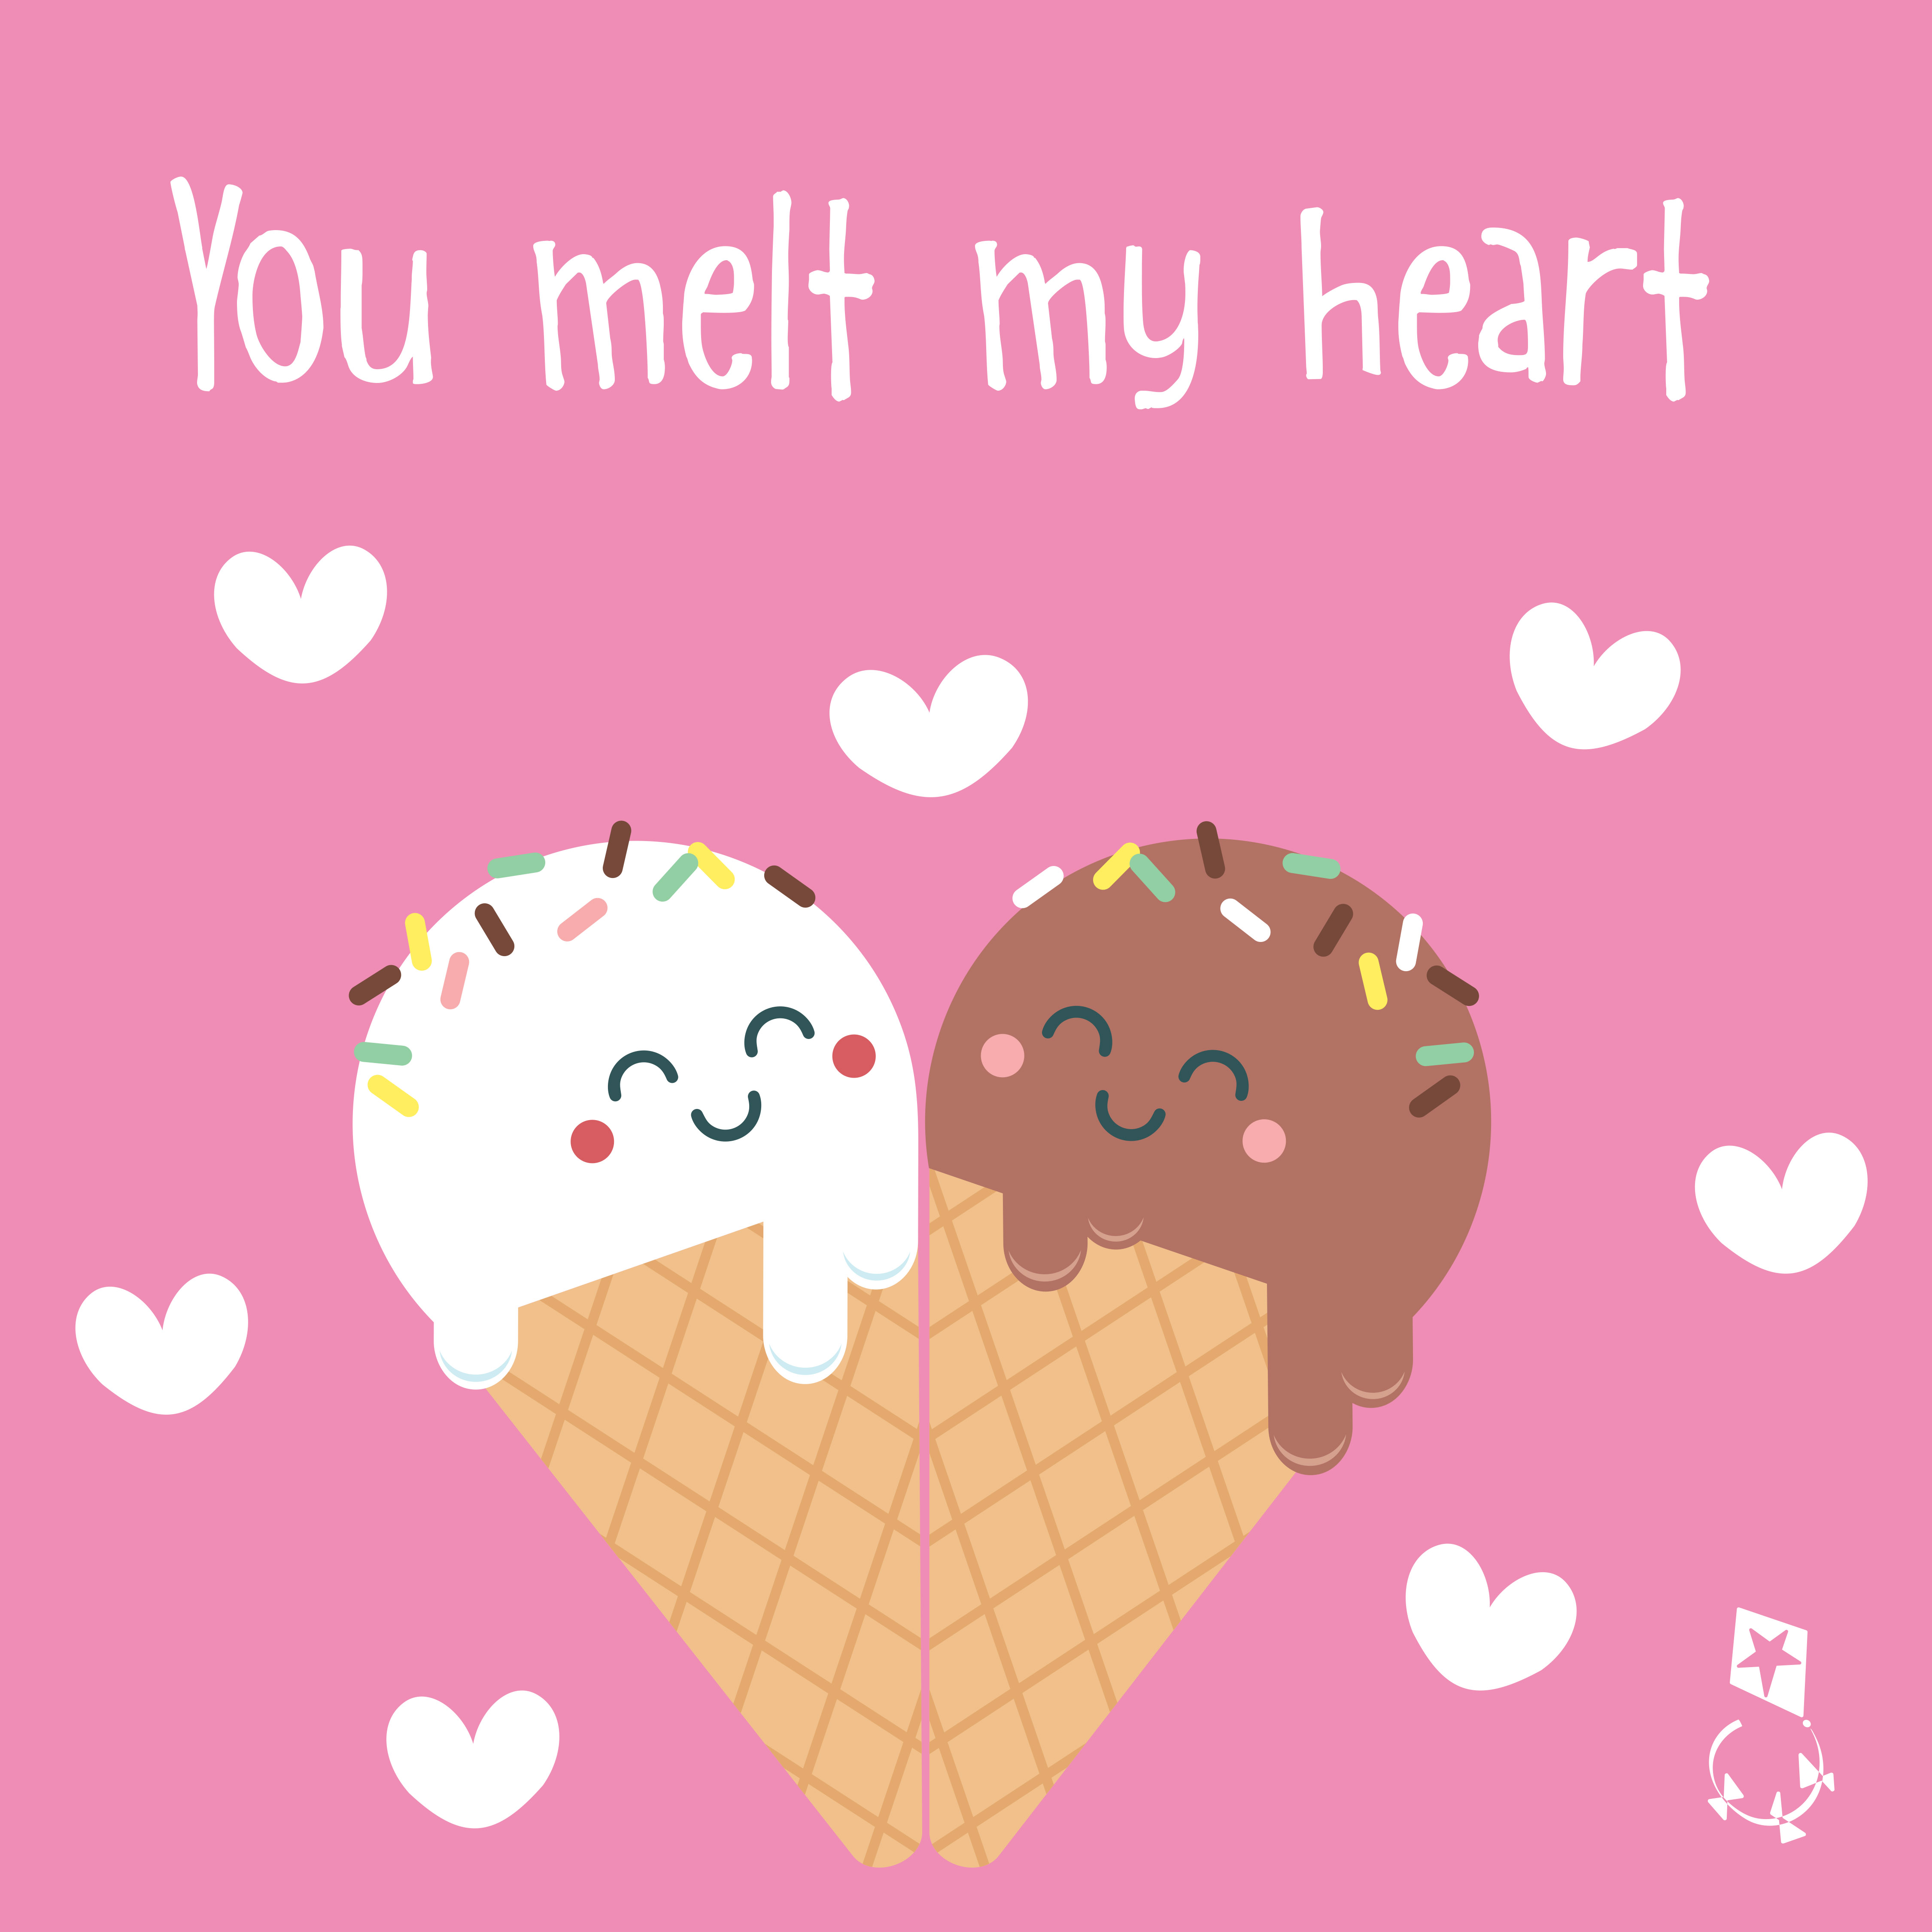 You melt my heart Valentine's Day card